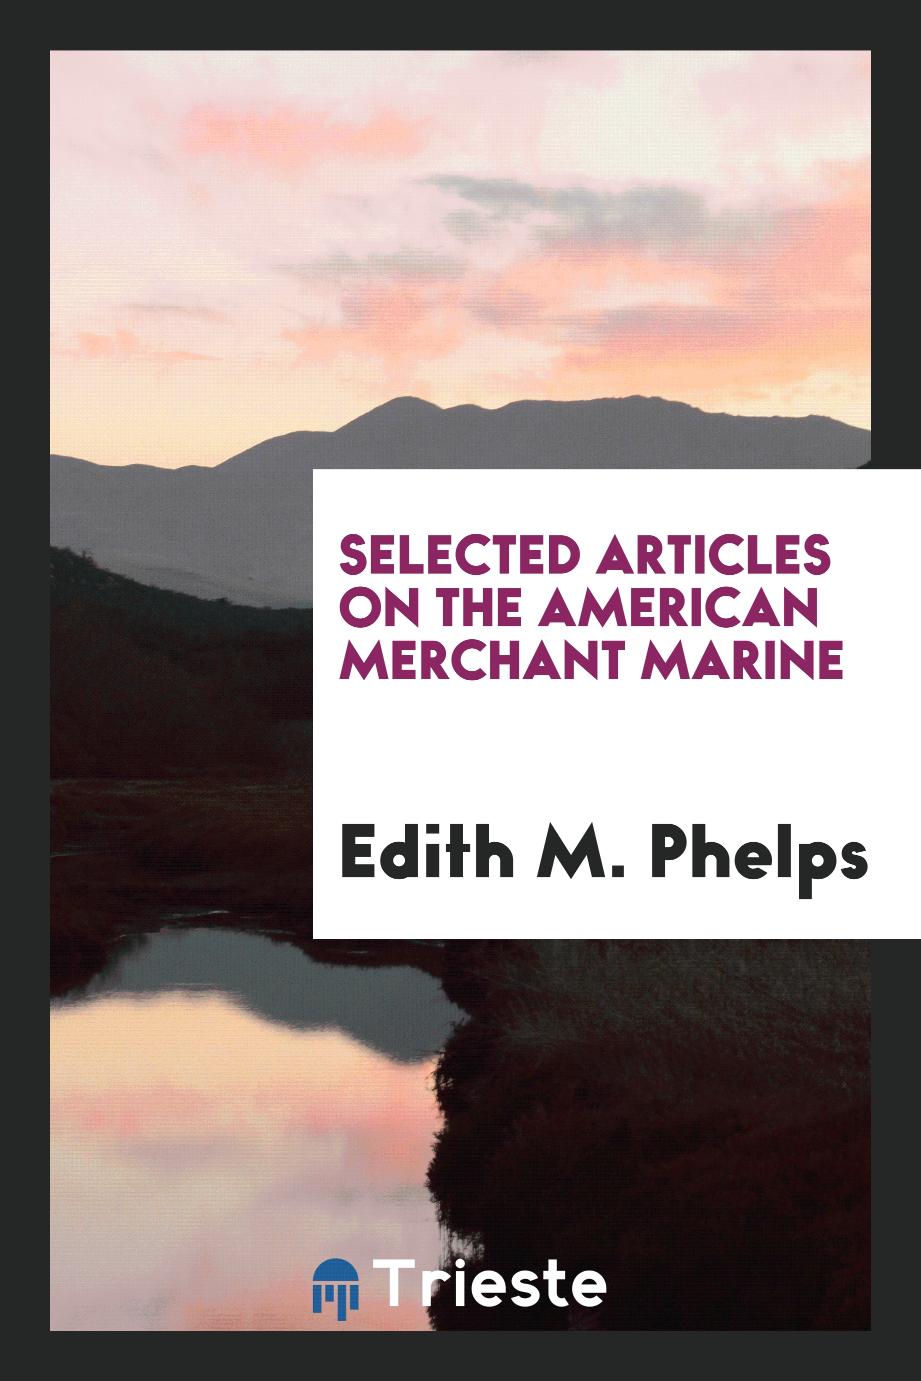 Selected articles on the American merchant marine